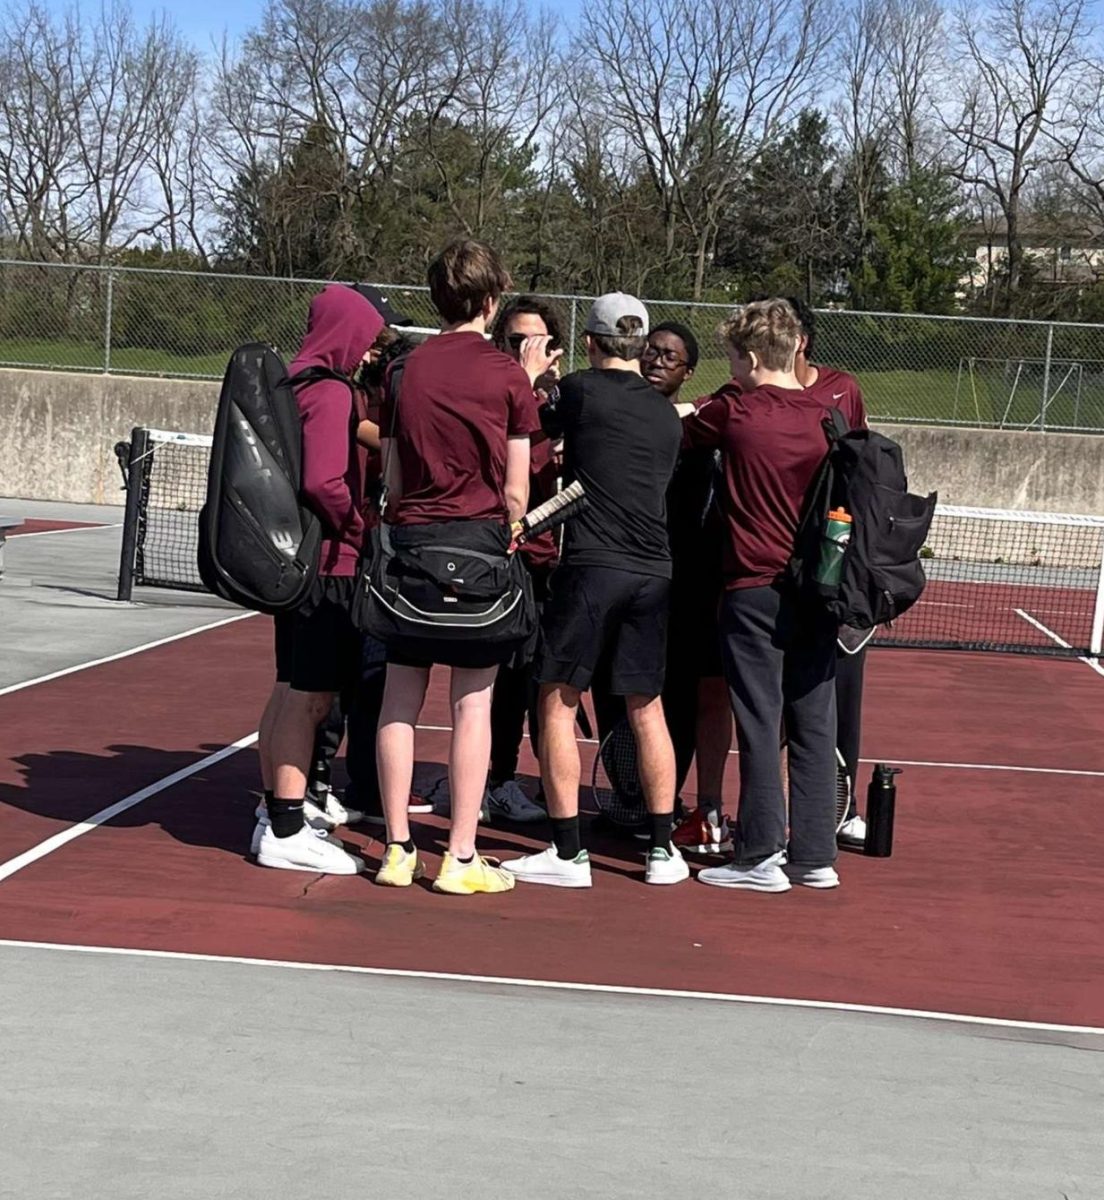 Boys+tennis+regroups+in+a+huddle.+%0APhoto+credit%3A+Berlin+Ulmer%2C+11.+